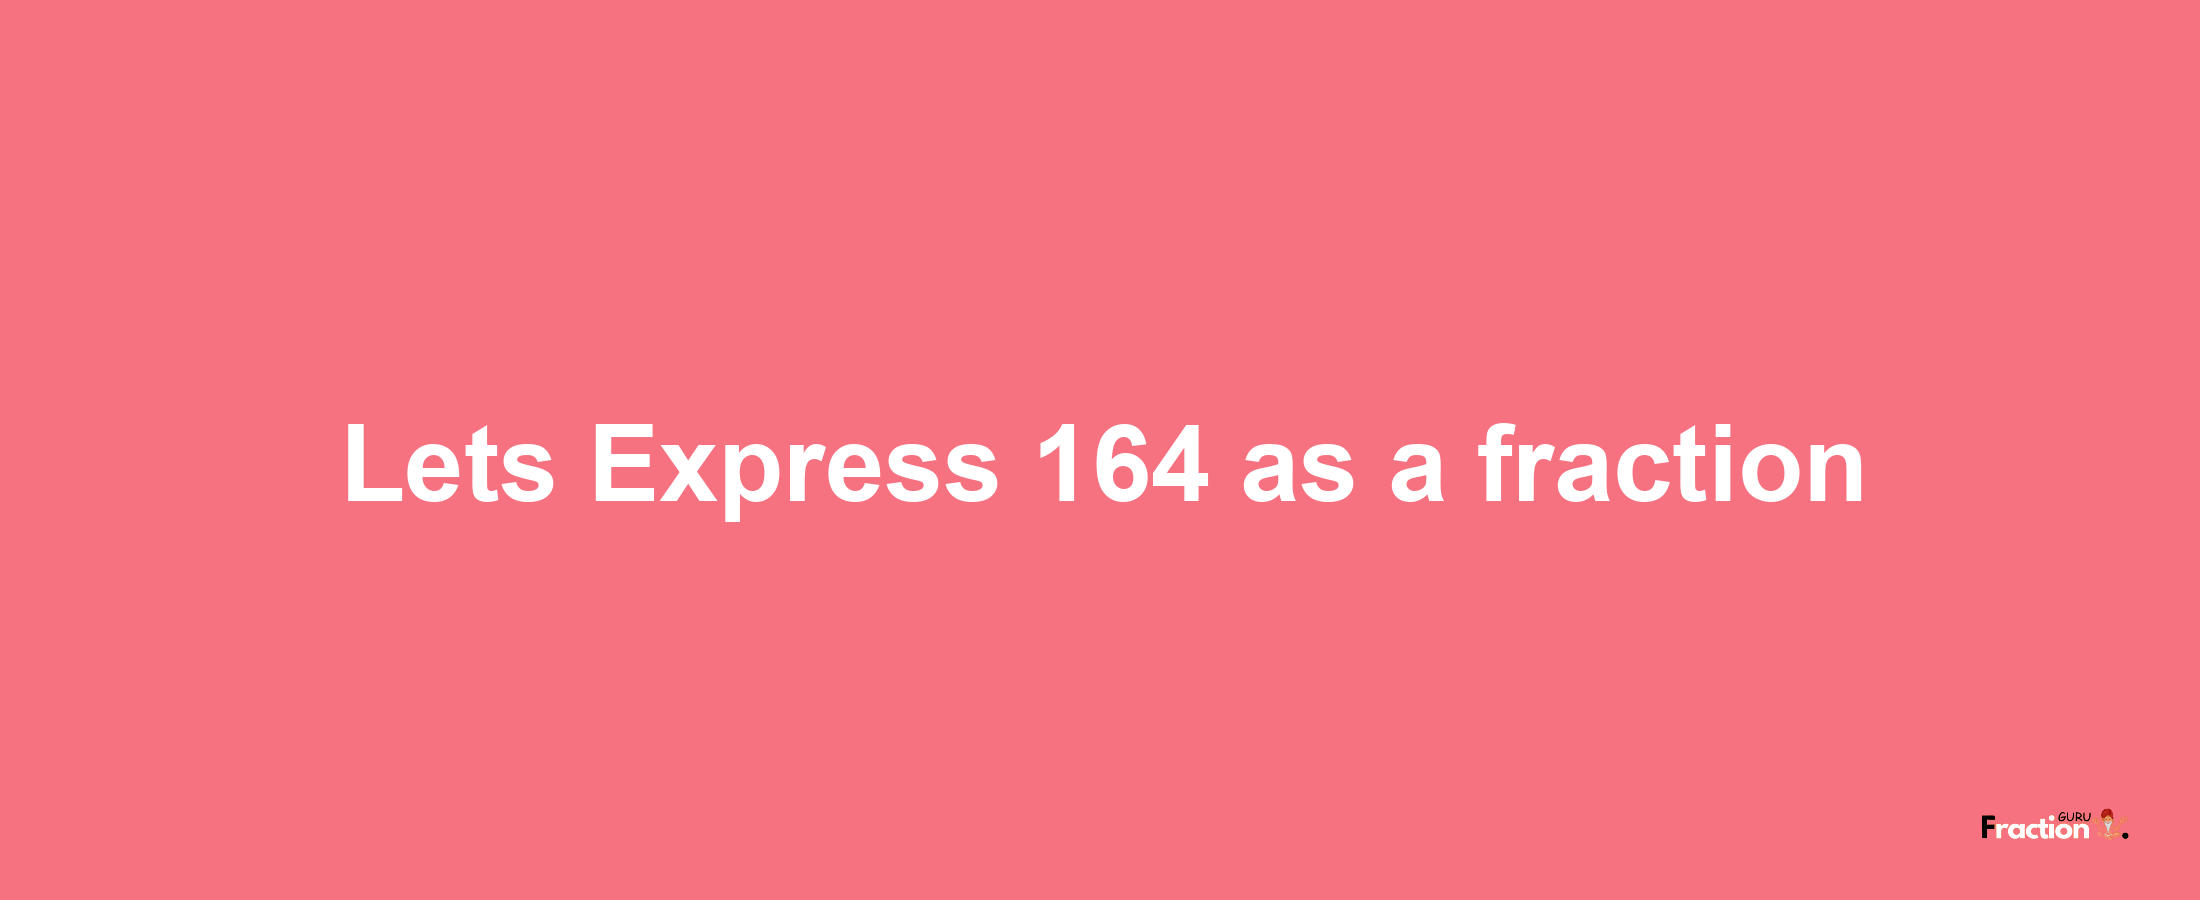 Lets Express 164 as afraction